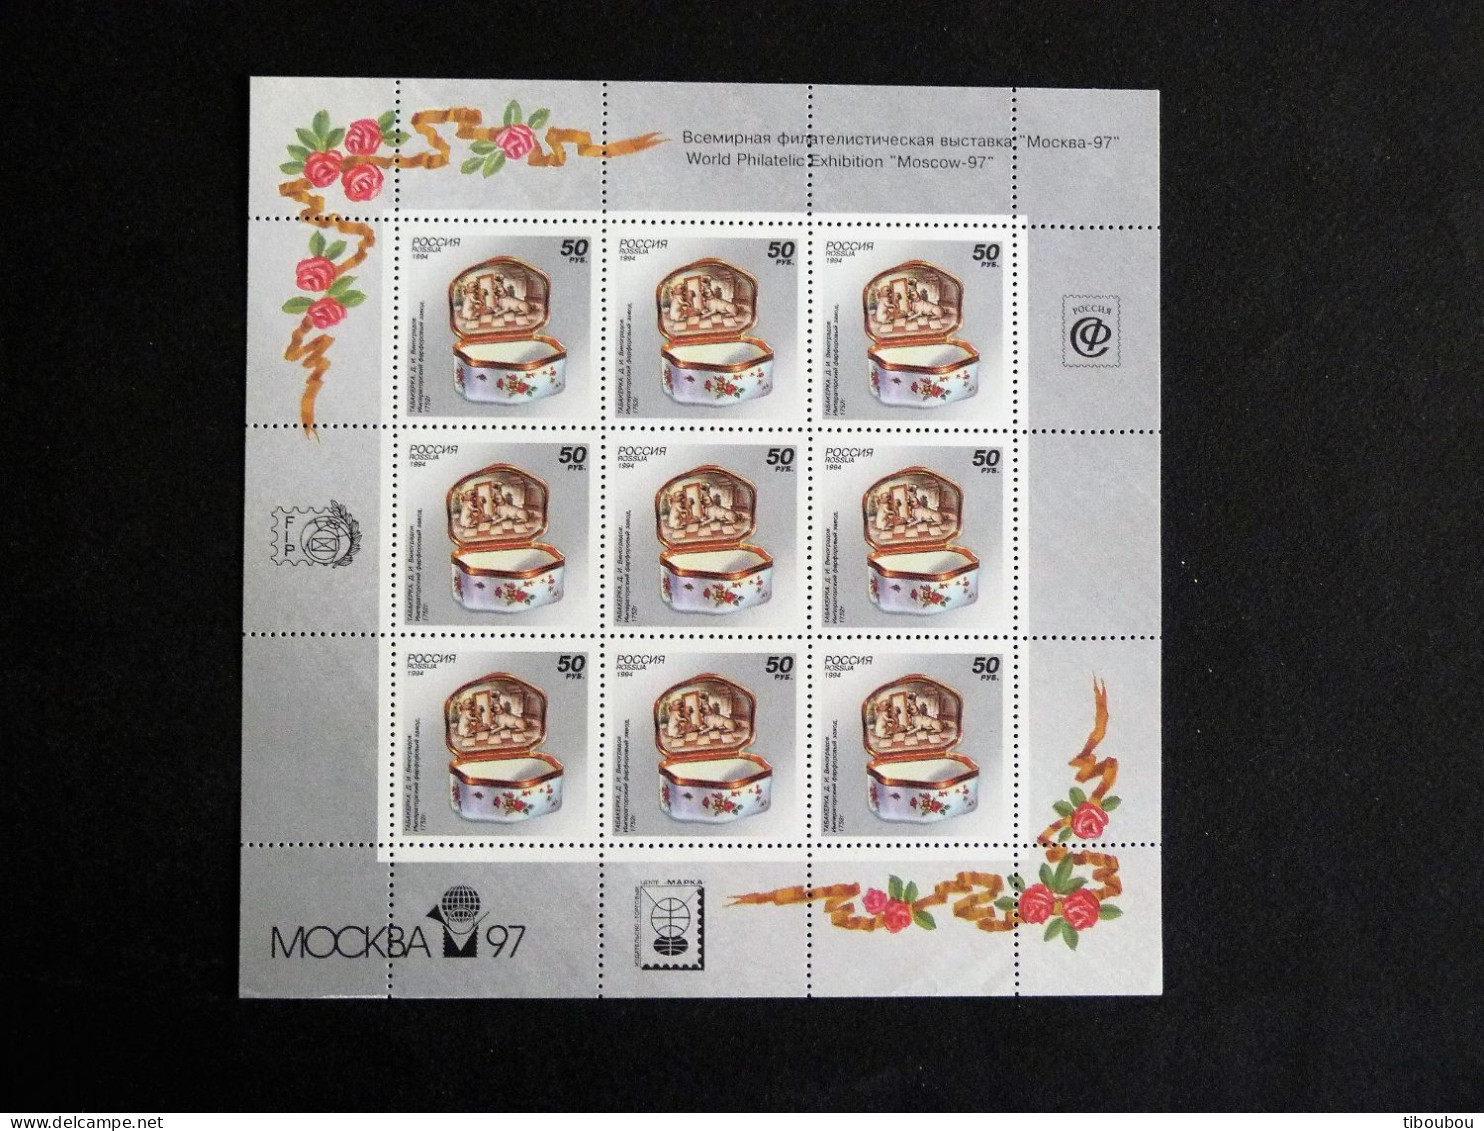 RUSSIE RUSSIA ROSSIJA URSS CCCP 6086 ** MNH PETITE FEUILLE - PORCELAINE MANUFACTURE SAINT PETERSBOURG / TABATIERE 1752 - Full Sheets